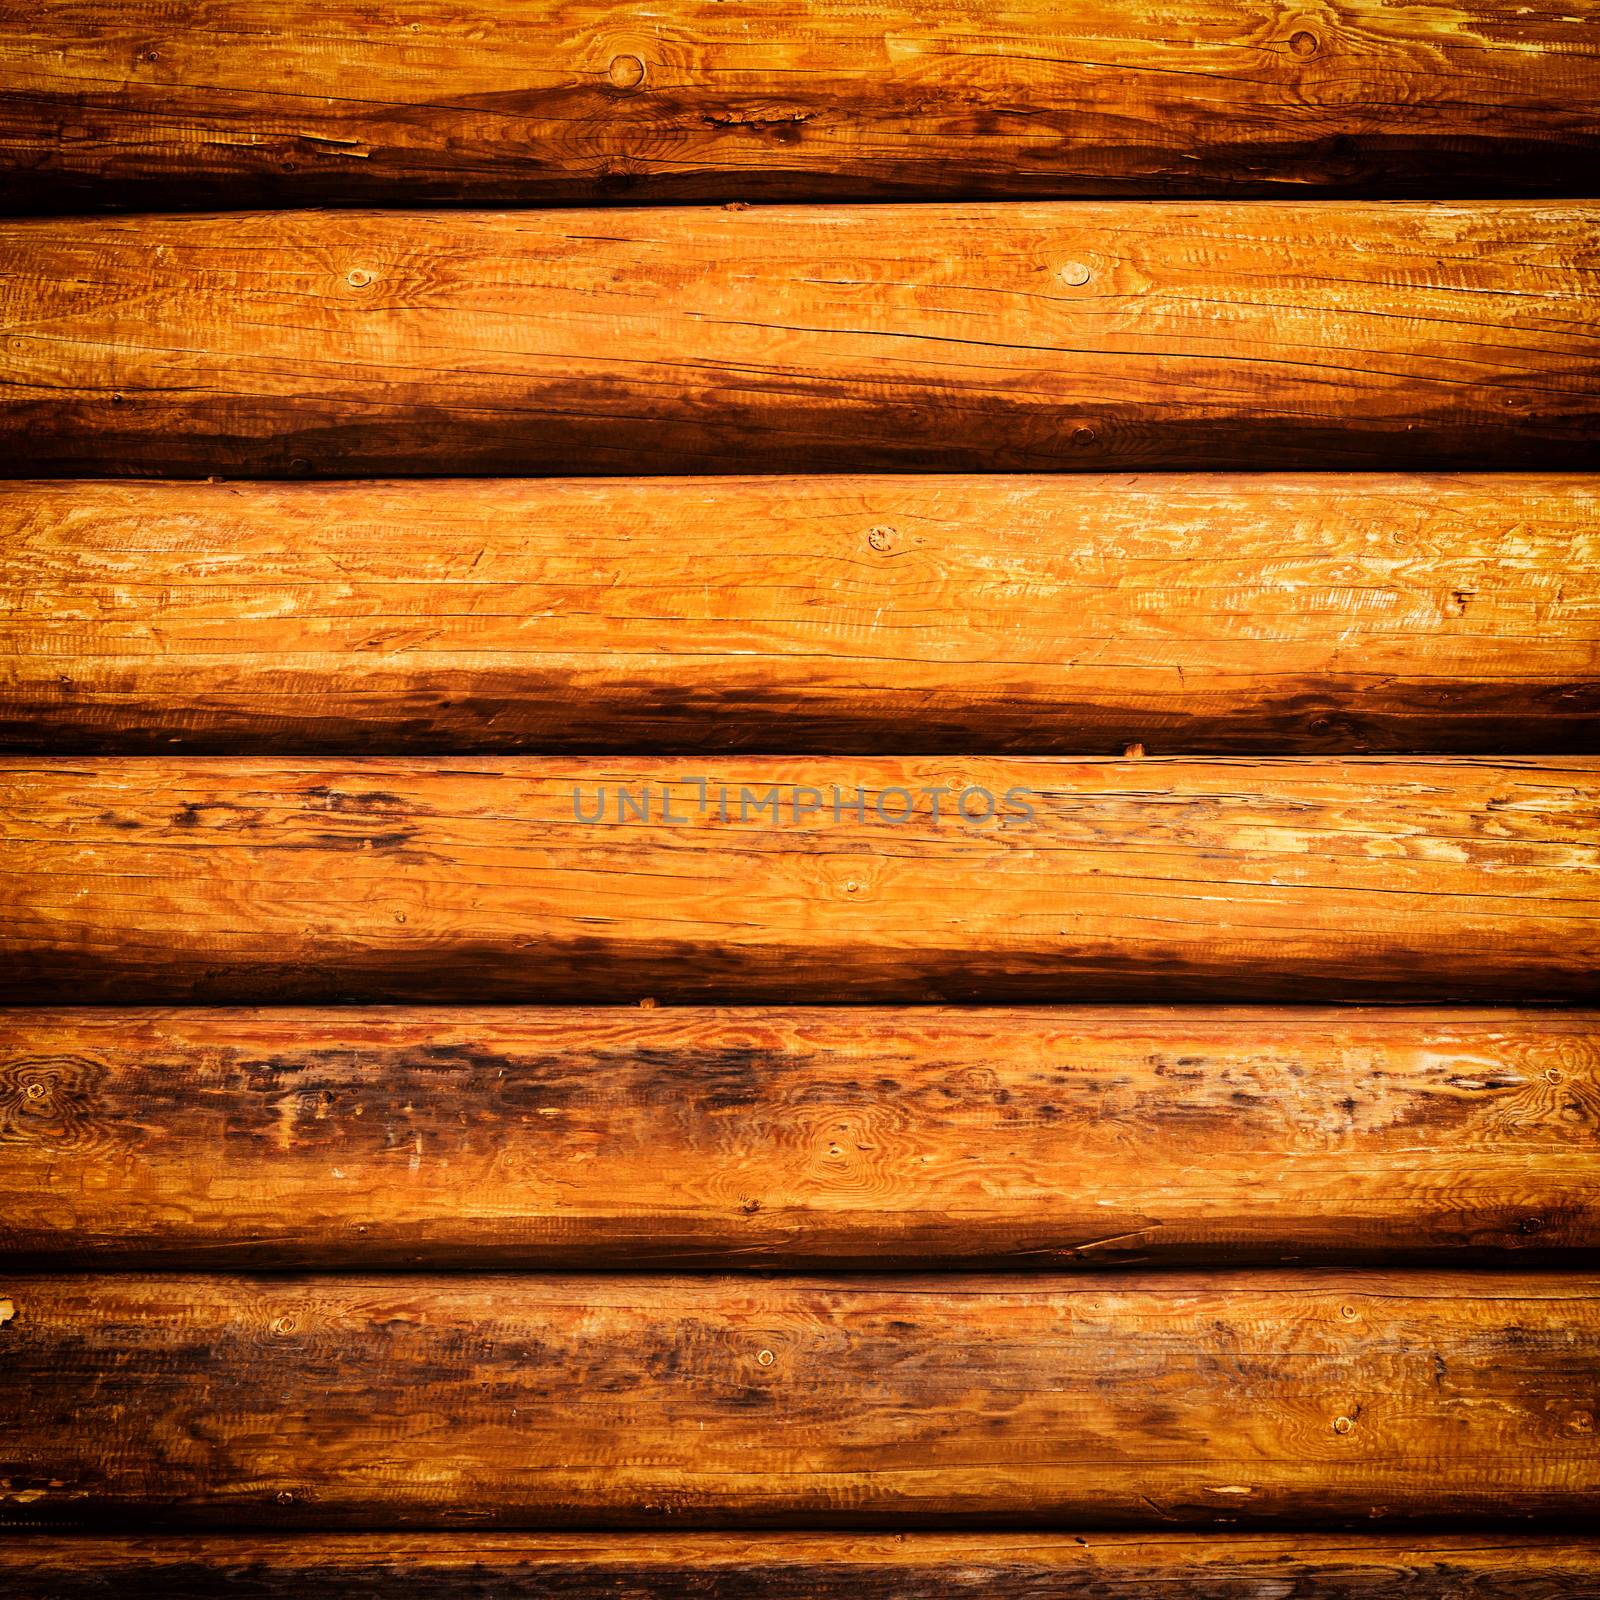 Old wooden texture can be used for vintage background